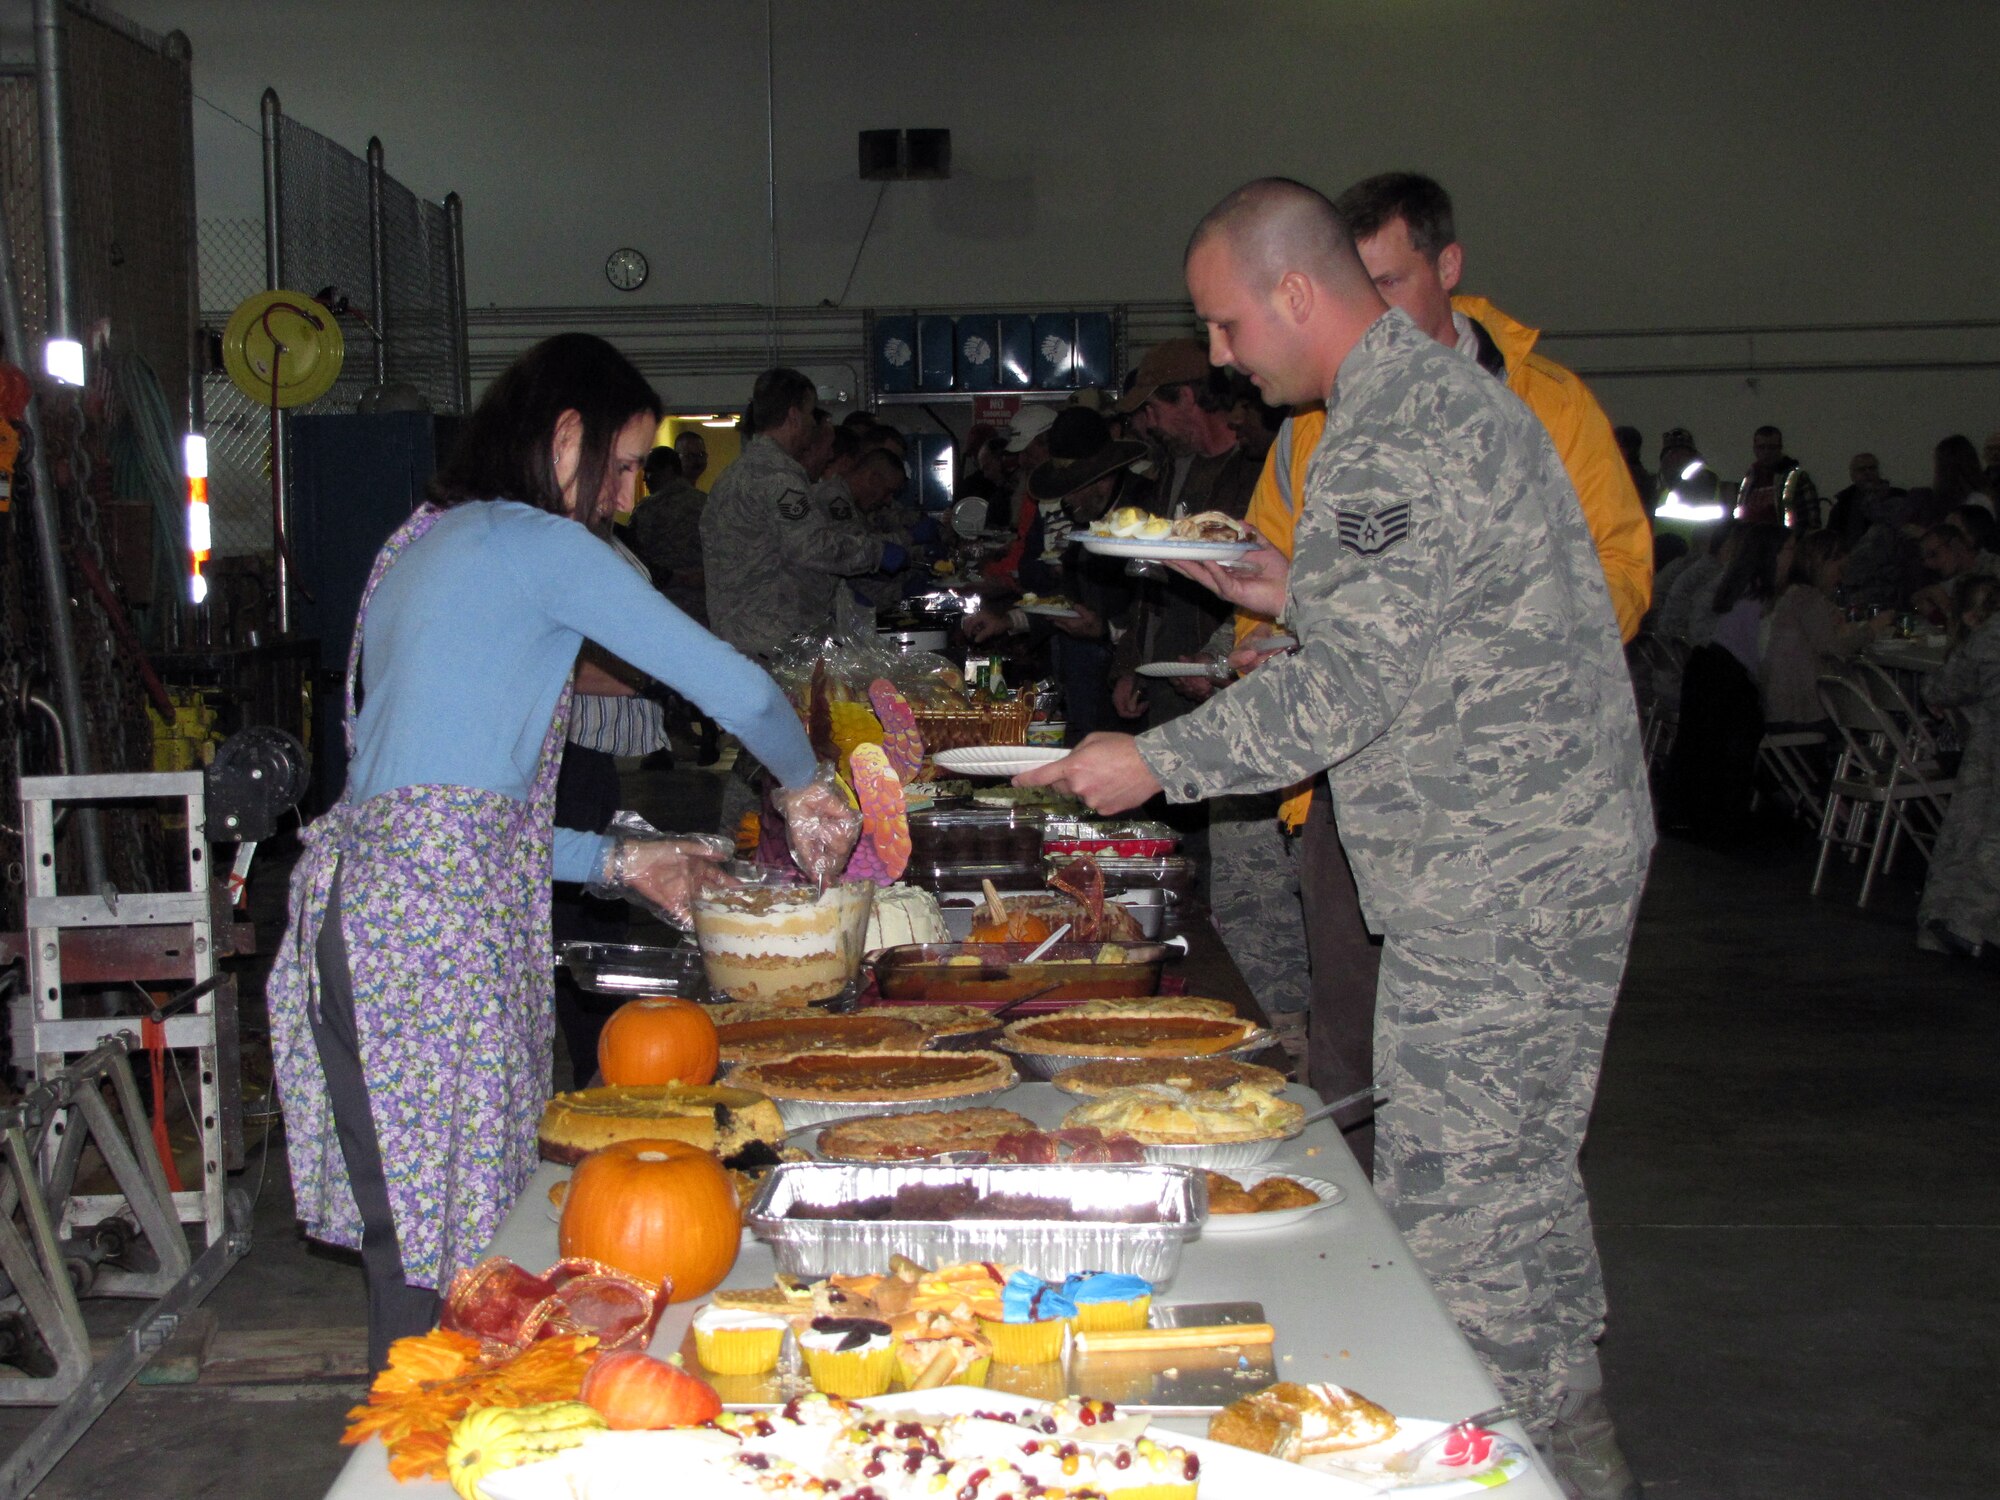 Jenni Roberts, wife of Lt. Col. Charles Roberts, 90th Civil Engineer Squadron commander, serves members of the 90th CES desserts during the 90th CES annual turkey feed held at Building 930, 90th CES pavement and equipment shop on Nov. 16 date. There were 23 fried and baked turkeys, nine hams and more than 44 desserts available for people to eat. The annual turkey feed started back in 1975, and continues on today. (Courtesy photo)